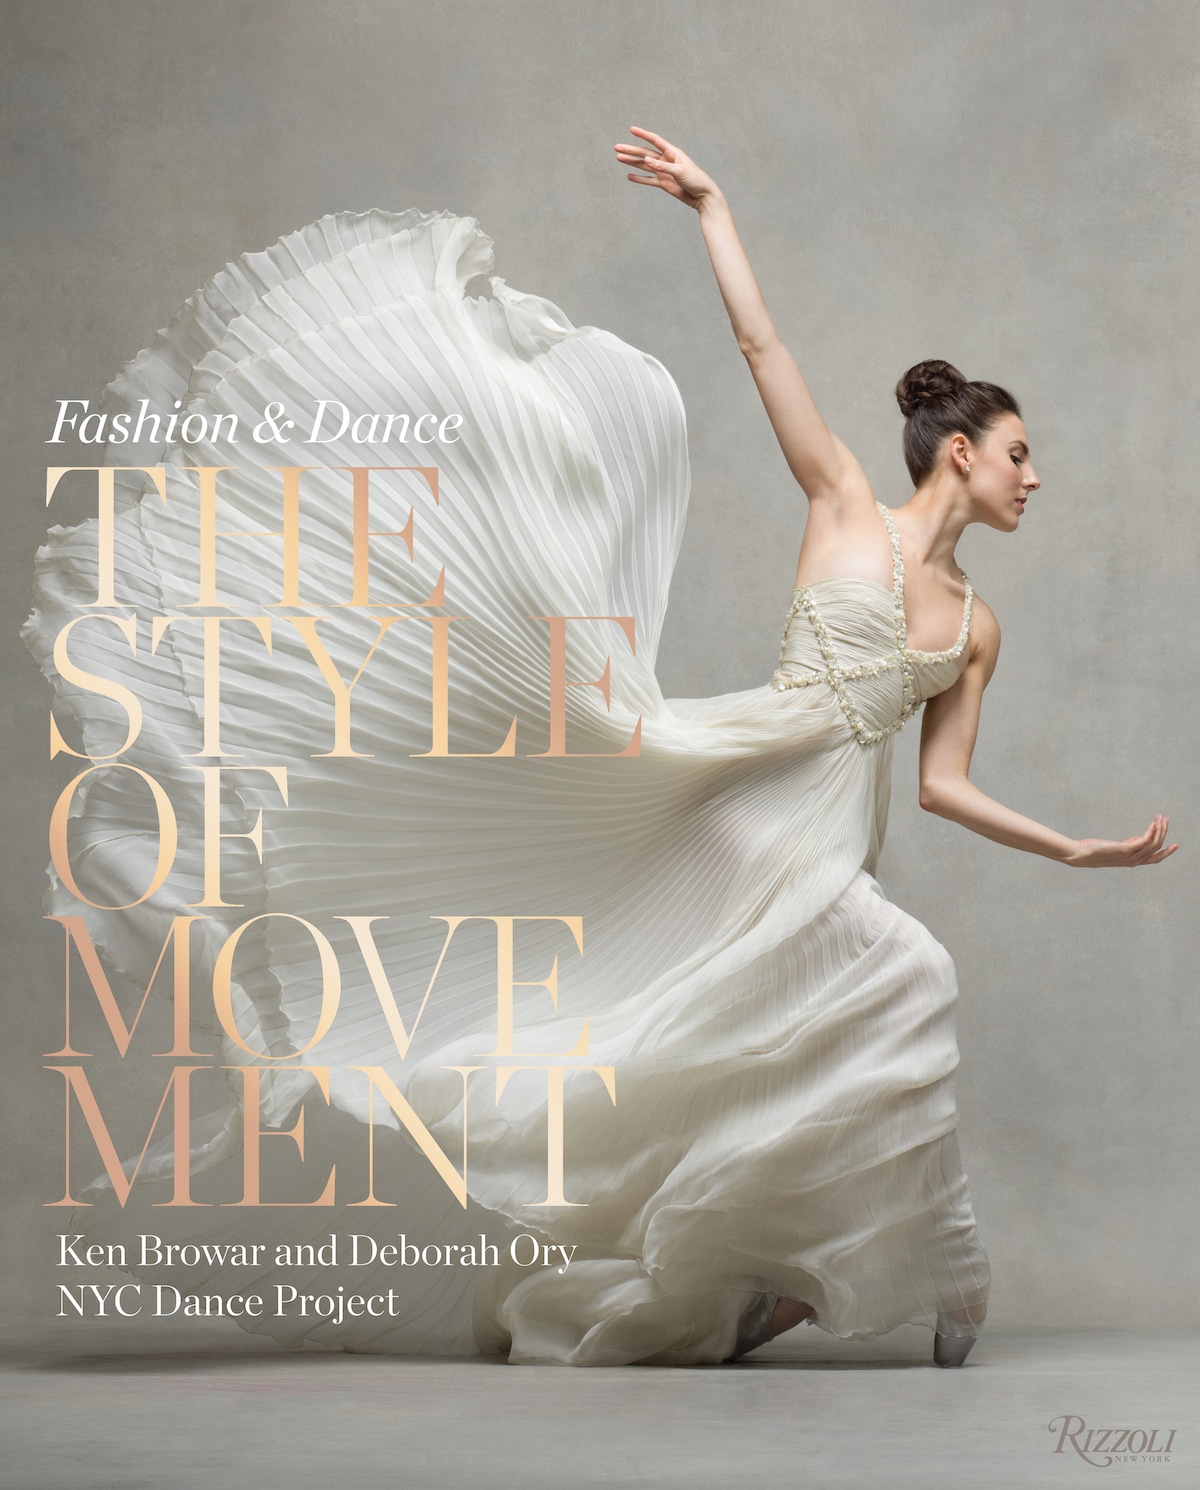 The Style of Movement Explores Relationship Between Fashion & Dance